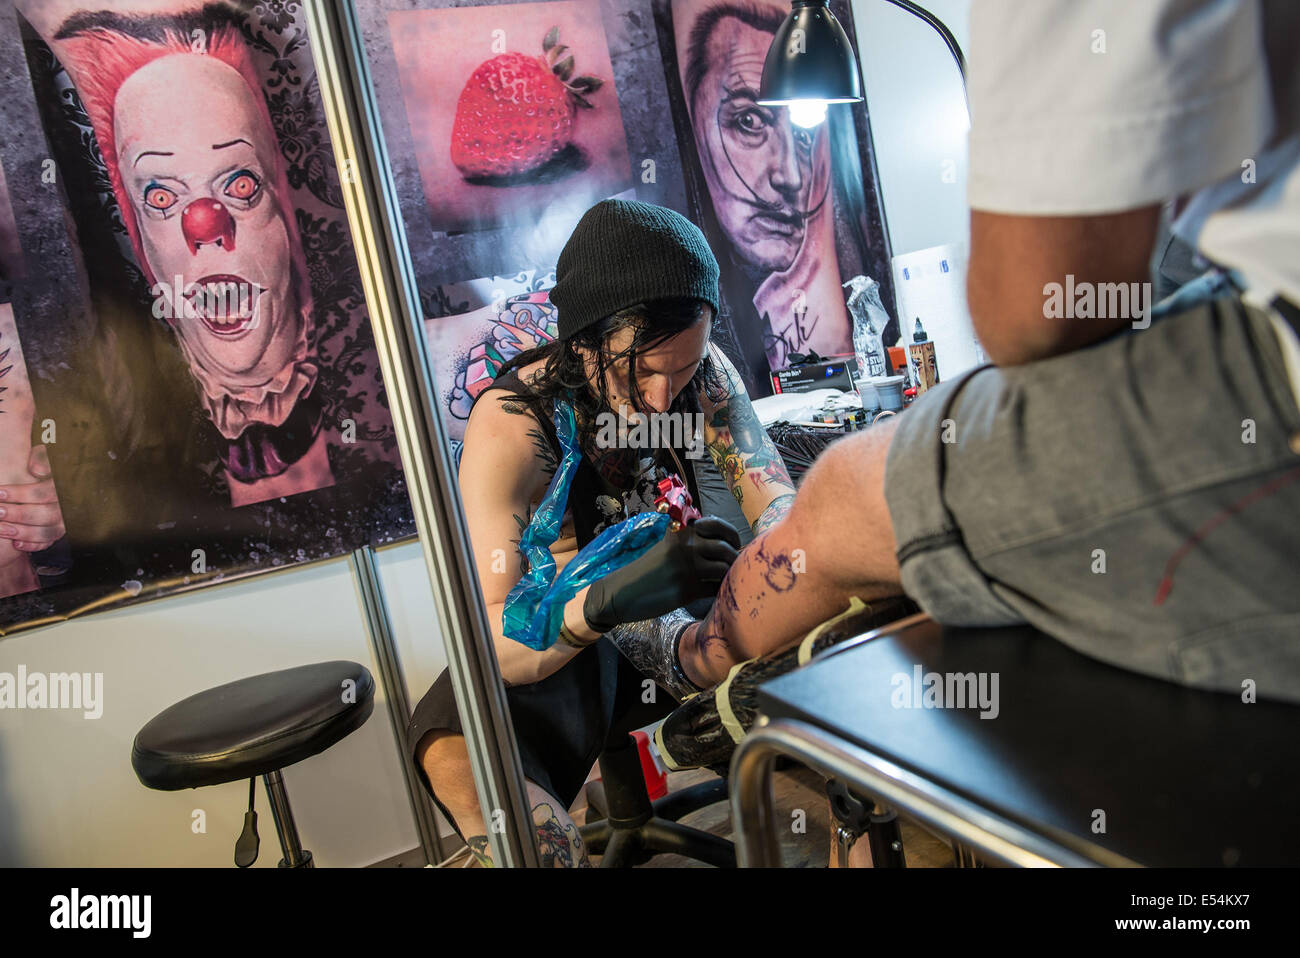 Gdansk, Poland. 20th July 2014. Tattoo artists works with his client during  the second day of Cropp Tattoo Konwent – sixth edition of tattoo convention  in Gdansk, Poland Credit: kpzfoto/Alamy Live News